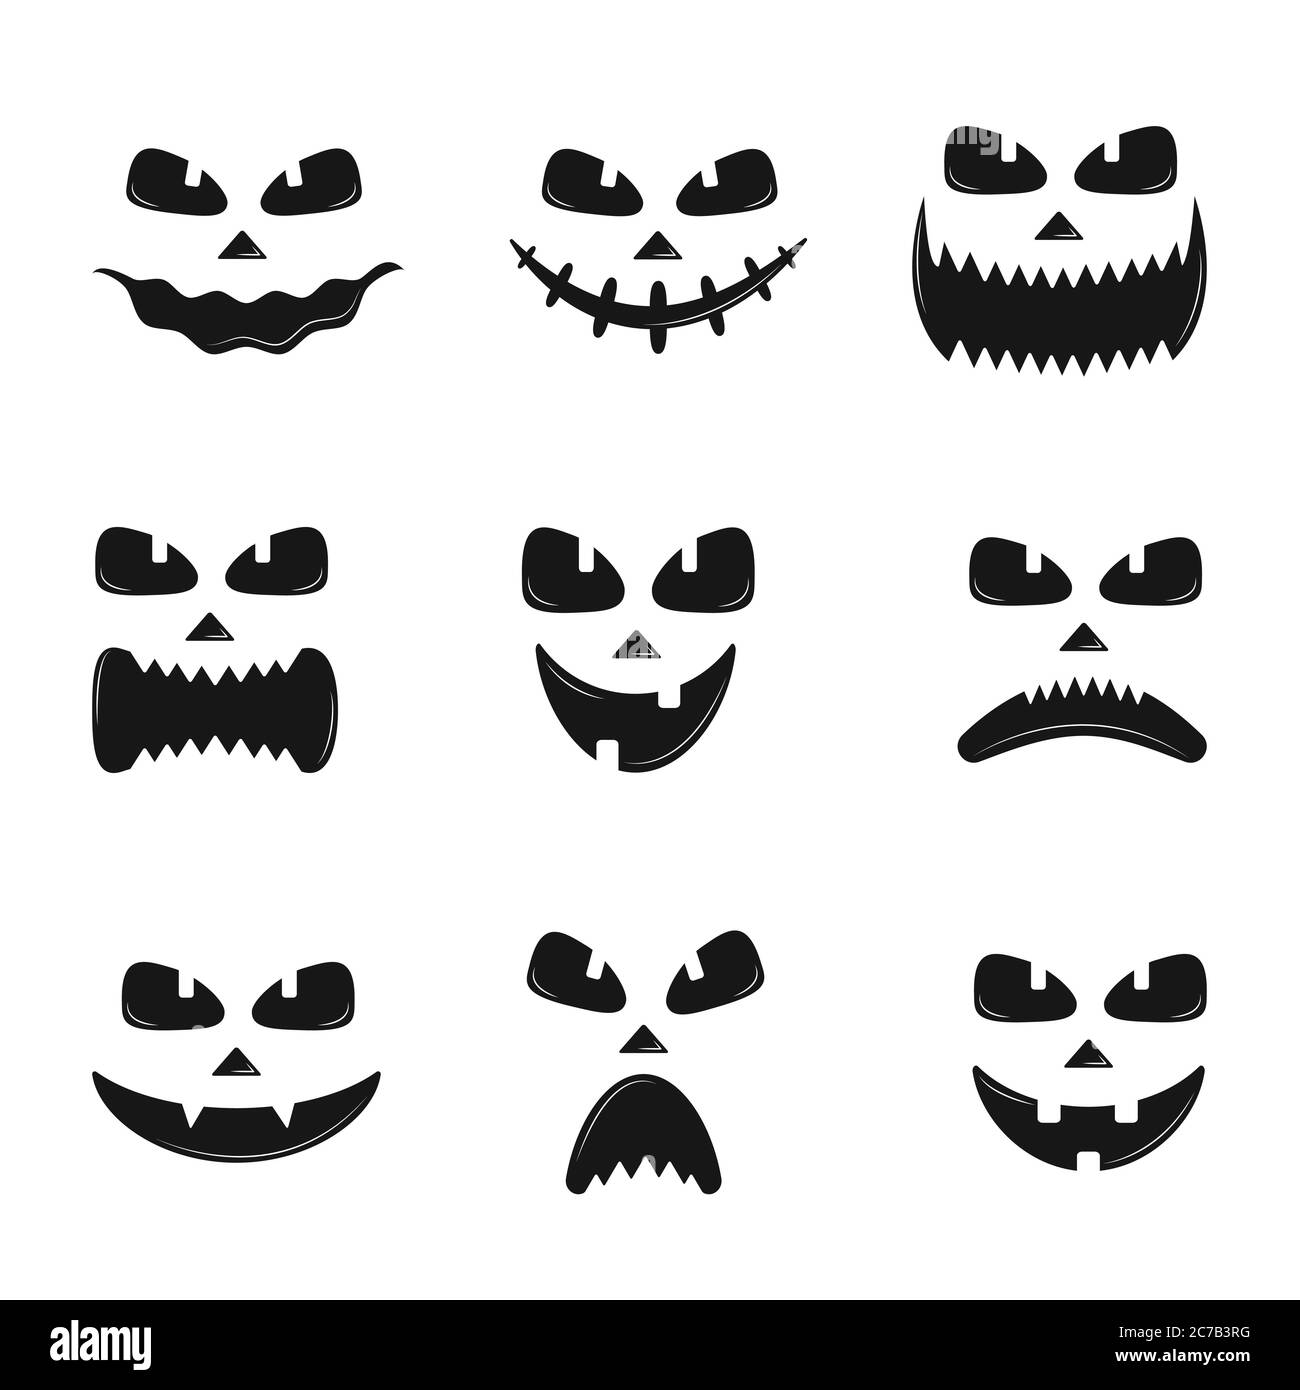 Set of pumpkin faces silhouette icons for Halloween isolated on white background. Scary pumpkin devil smile, spooky jack o lanter. Vector illustration Stock Vector